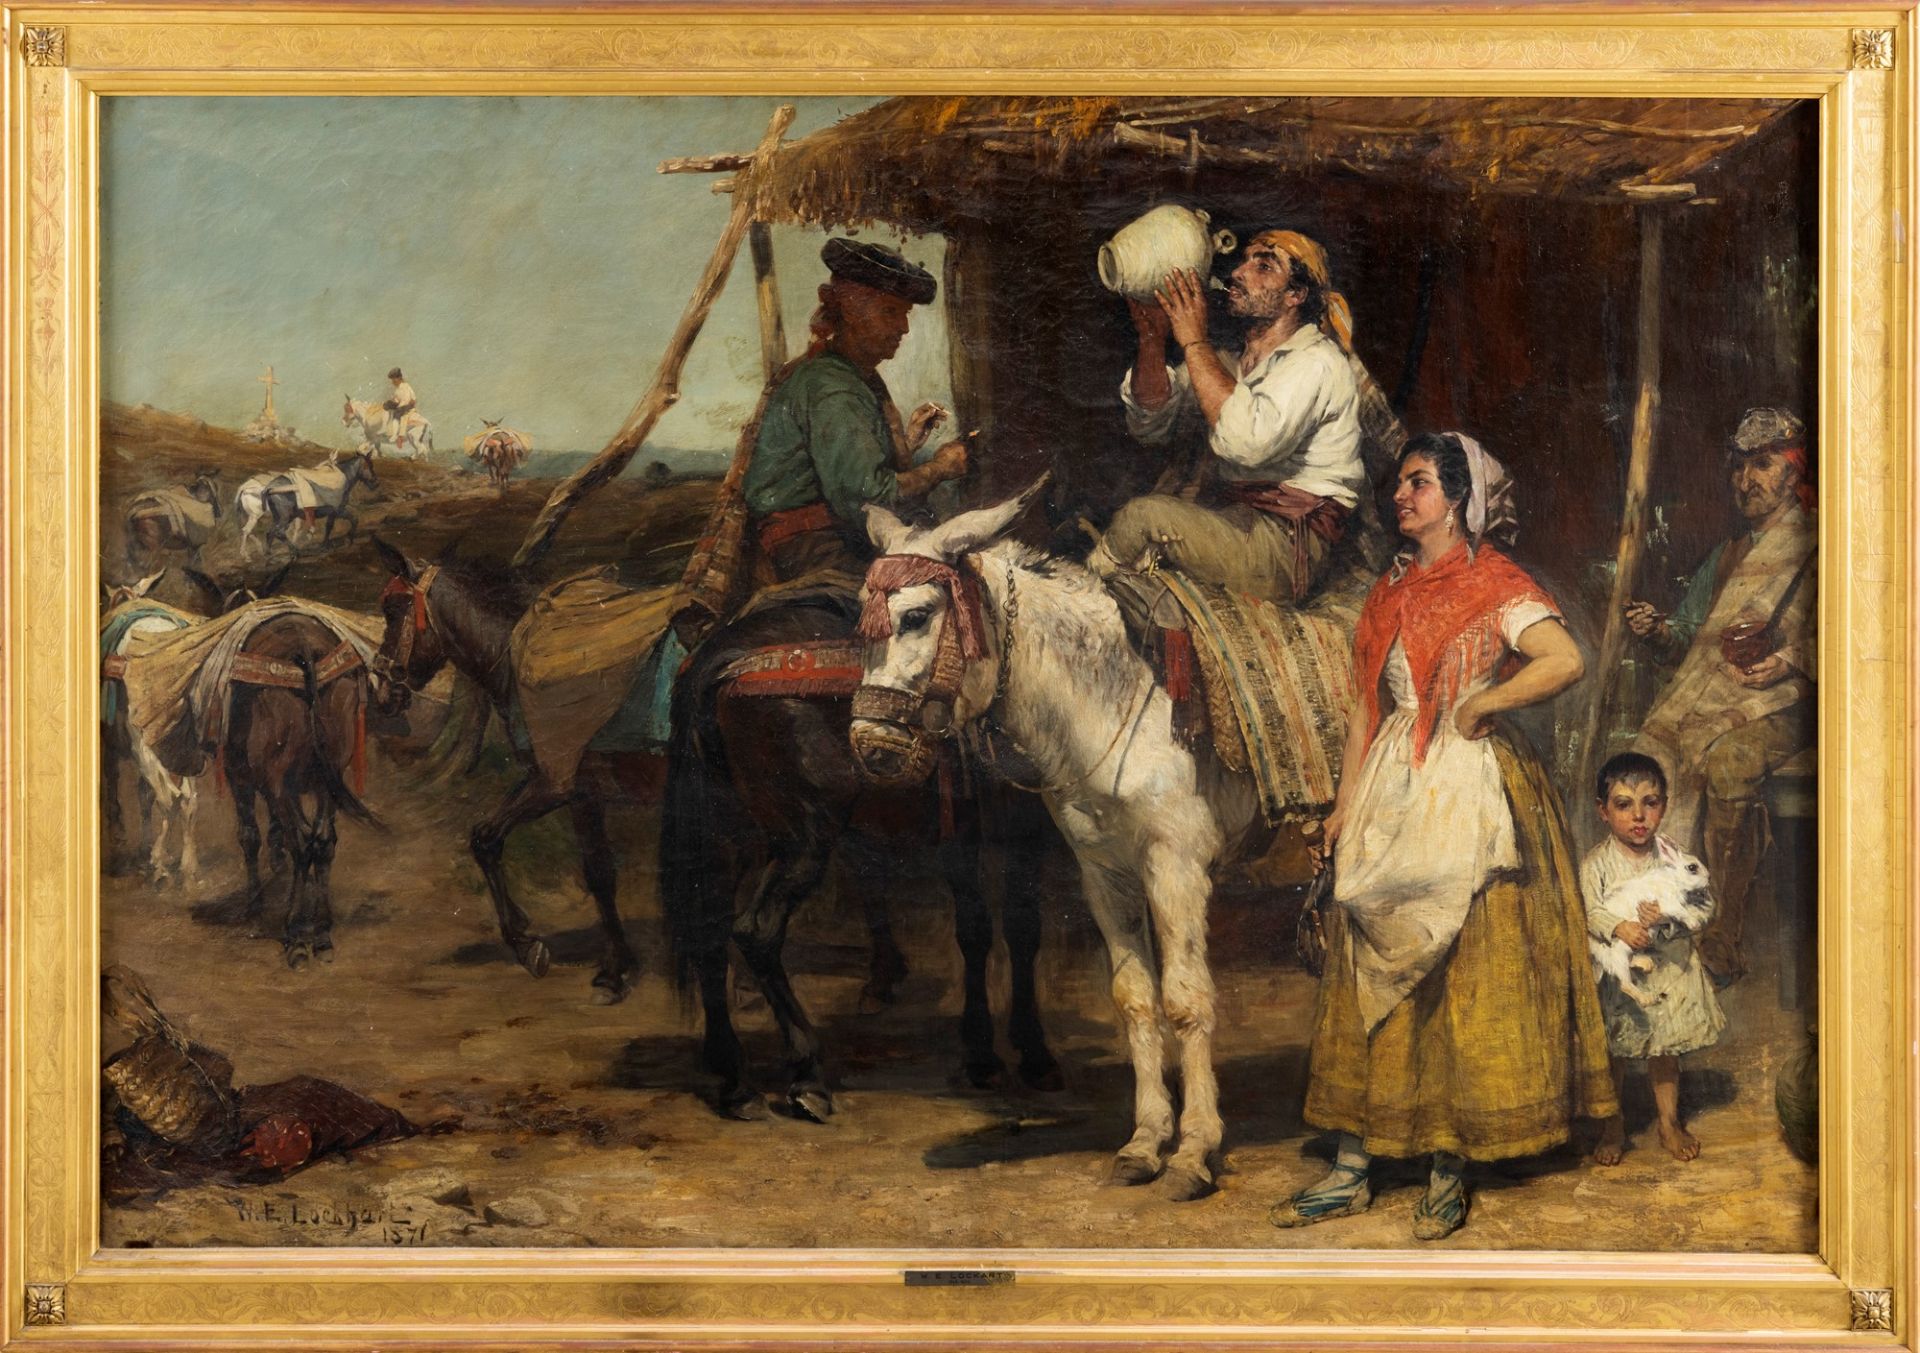 William Ewart Lockhart (Eaglesfield 1846-Londra 1900) - Spain, the stopover for the gypsies, 1871 - Image 4 of 4